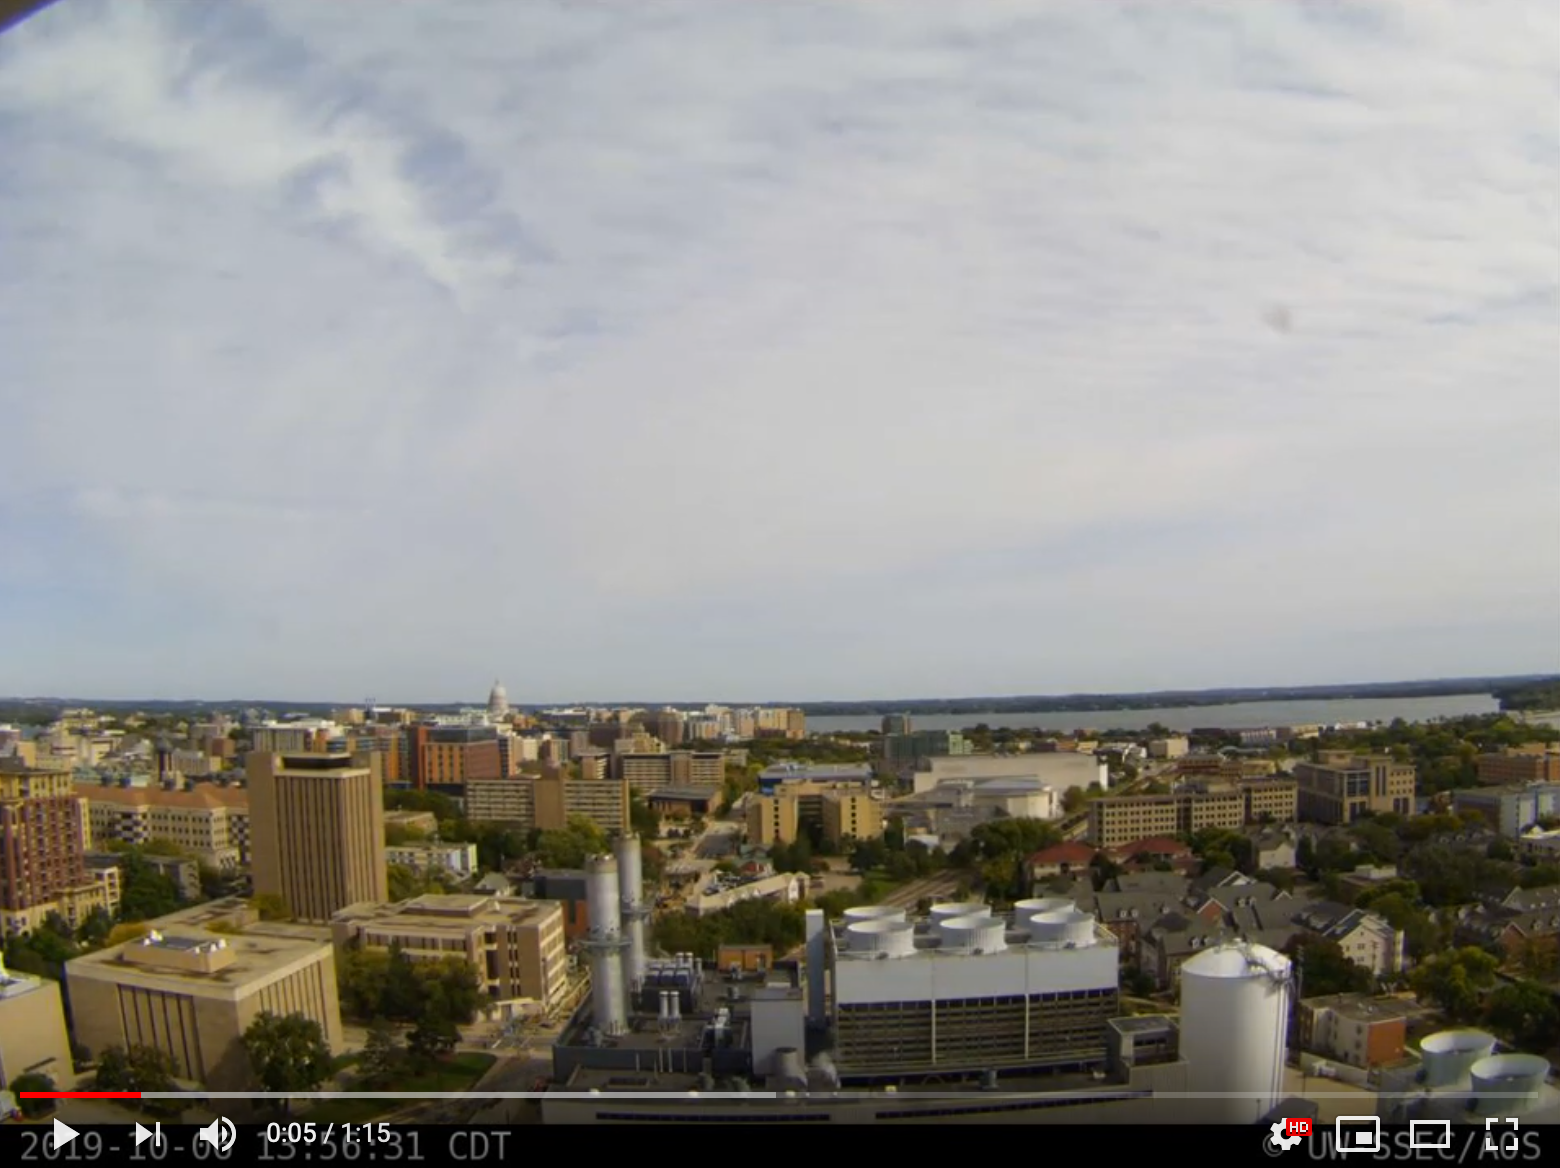 Time lapse of east-facing AOSS rooftop camera images [click to play YouTube video]